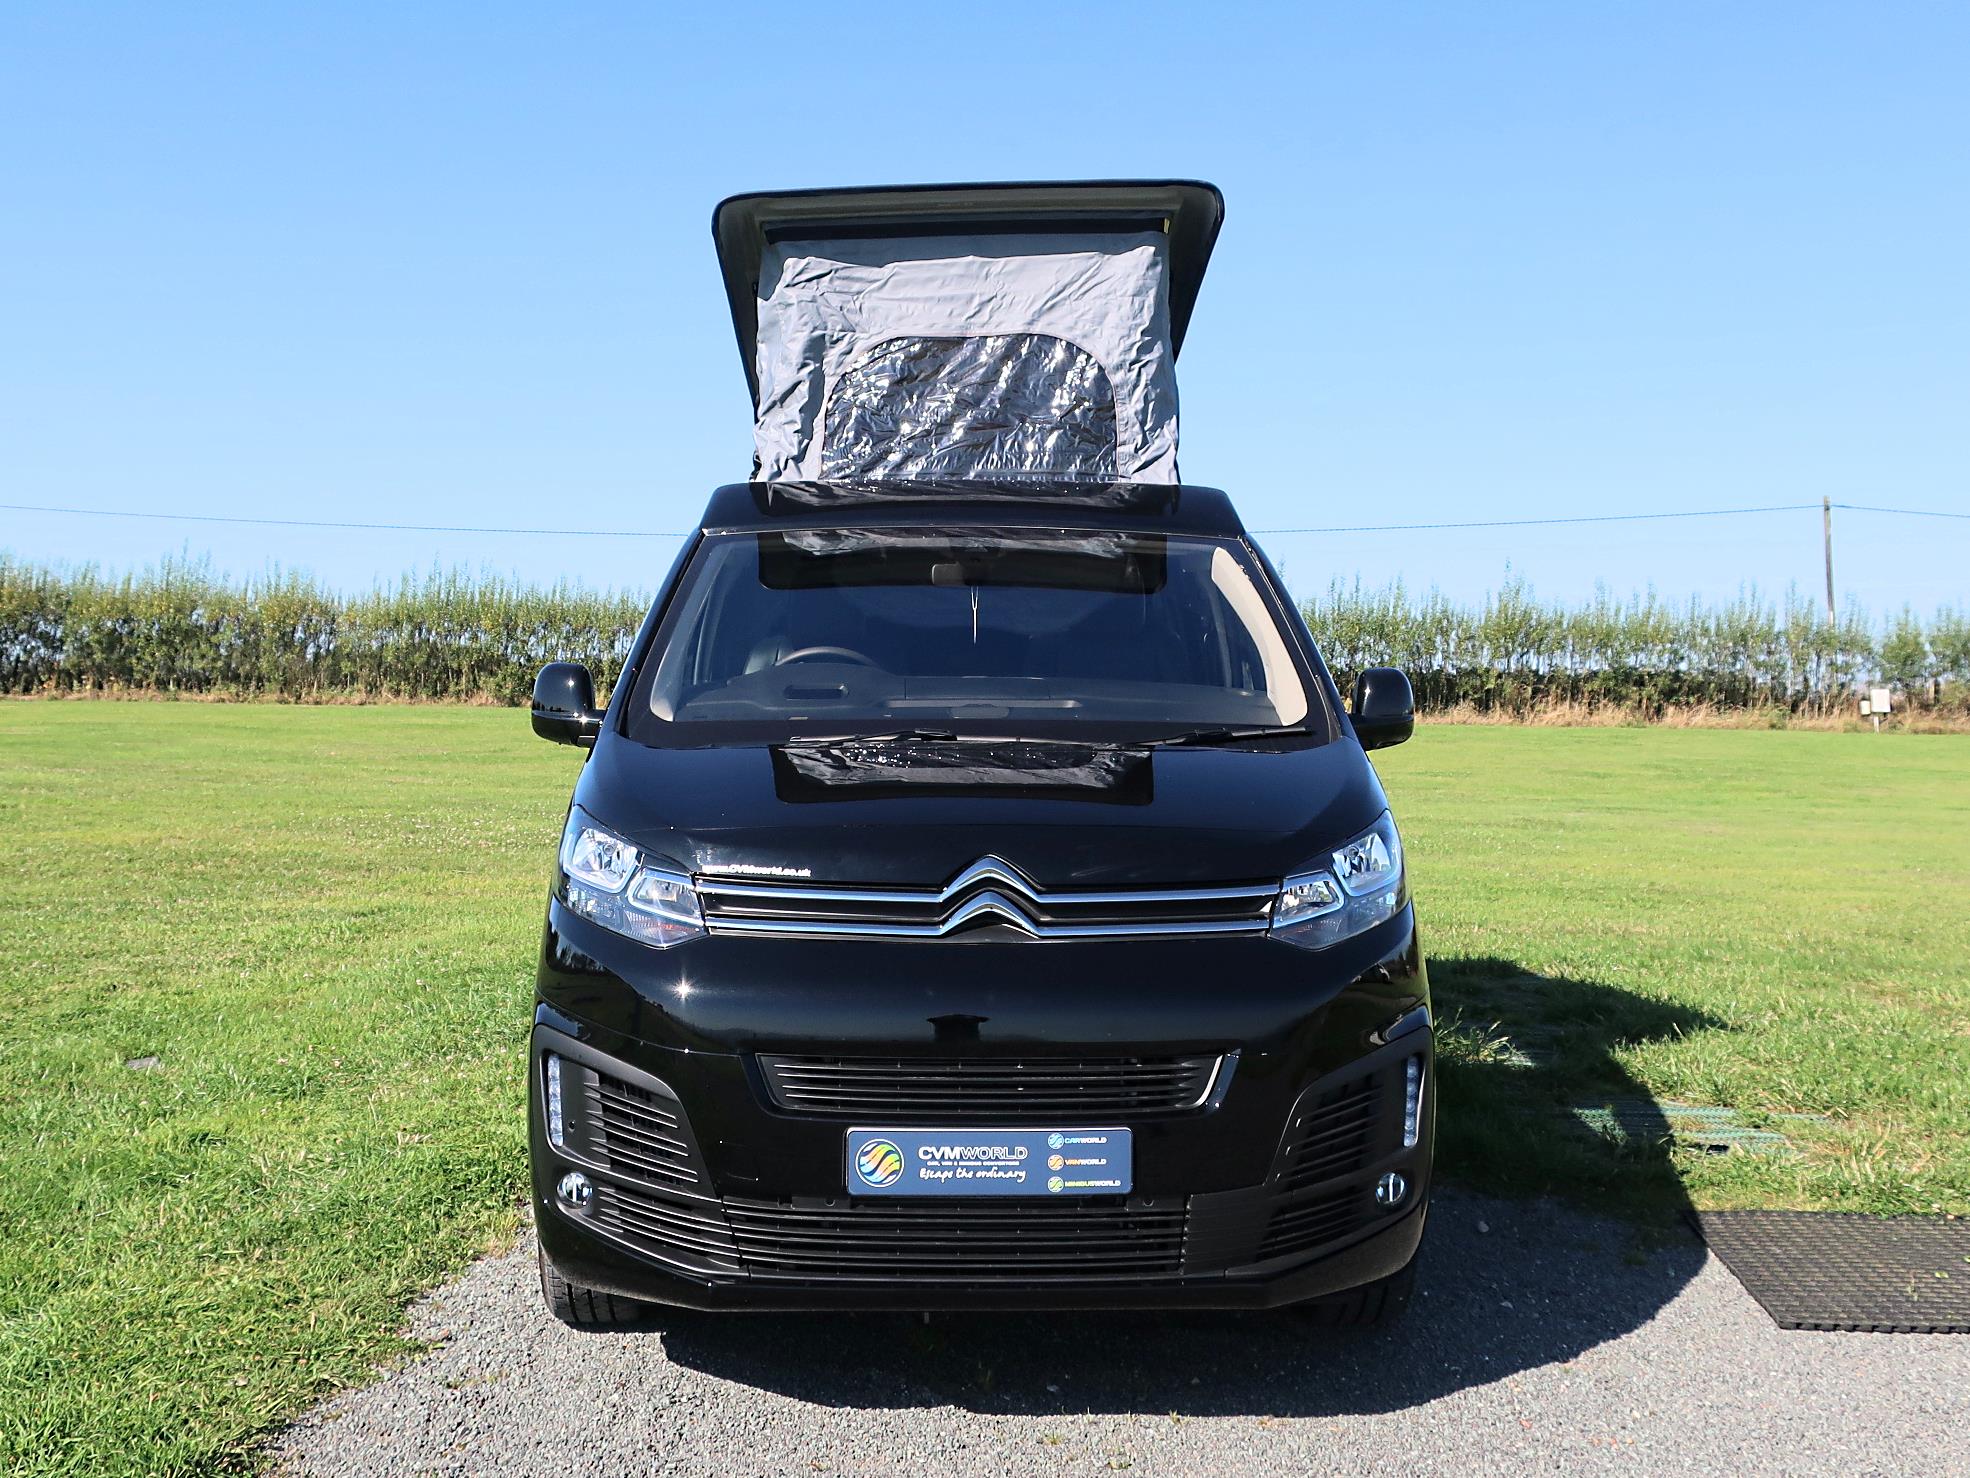 Brand New Citroen Dispatch XL 4 Berth 4 Travelling Campervan in Black For Sale with Black Pop Top Roof Rock and Roll Bed and Solar Panel - Pop Top Roof 4